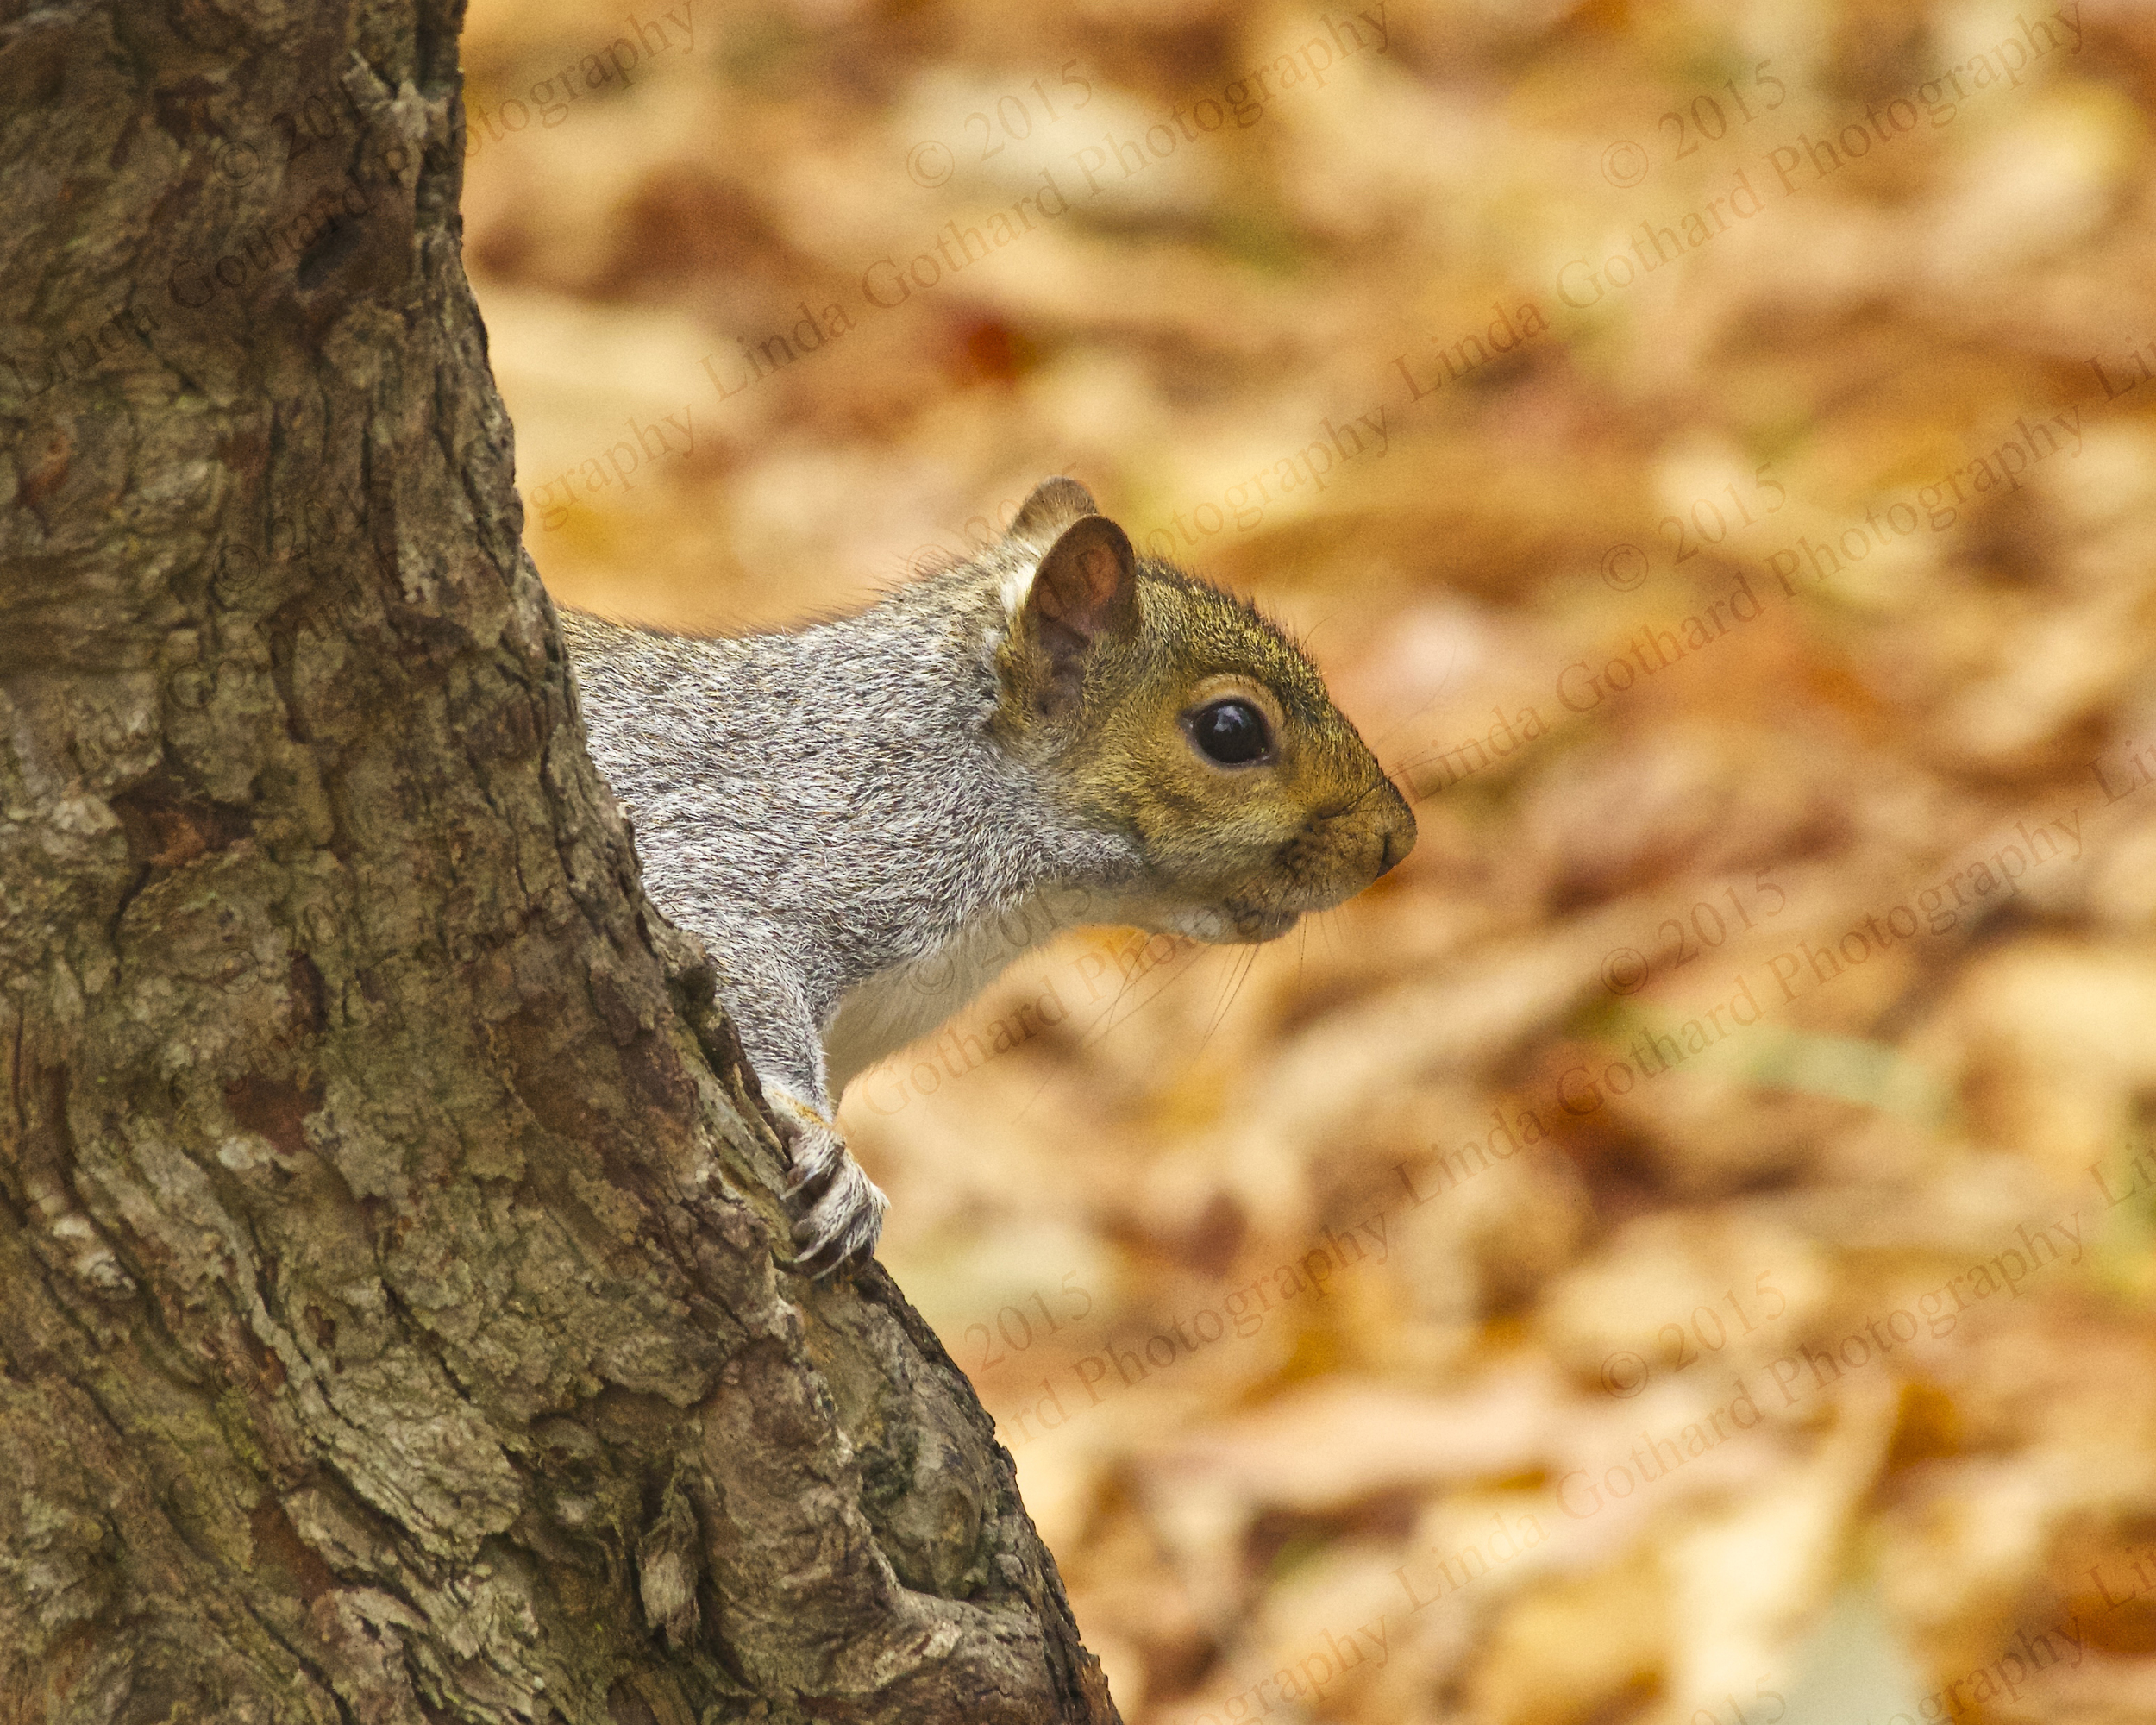 IMG_8086 Have you seen my nuts? Battle of the Sexes Nov 14 - Version 4.jpg